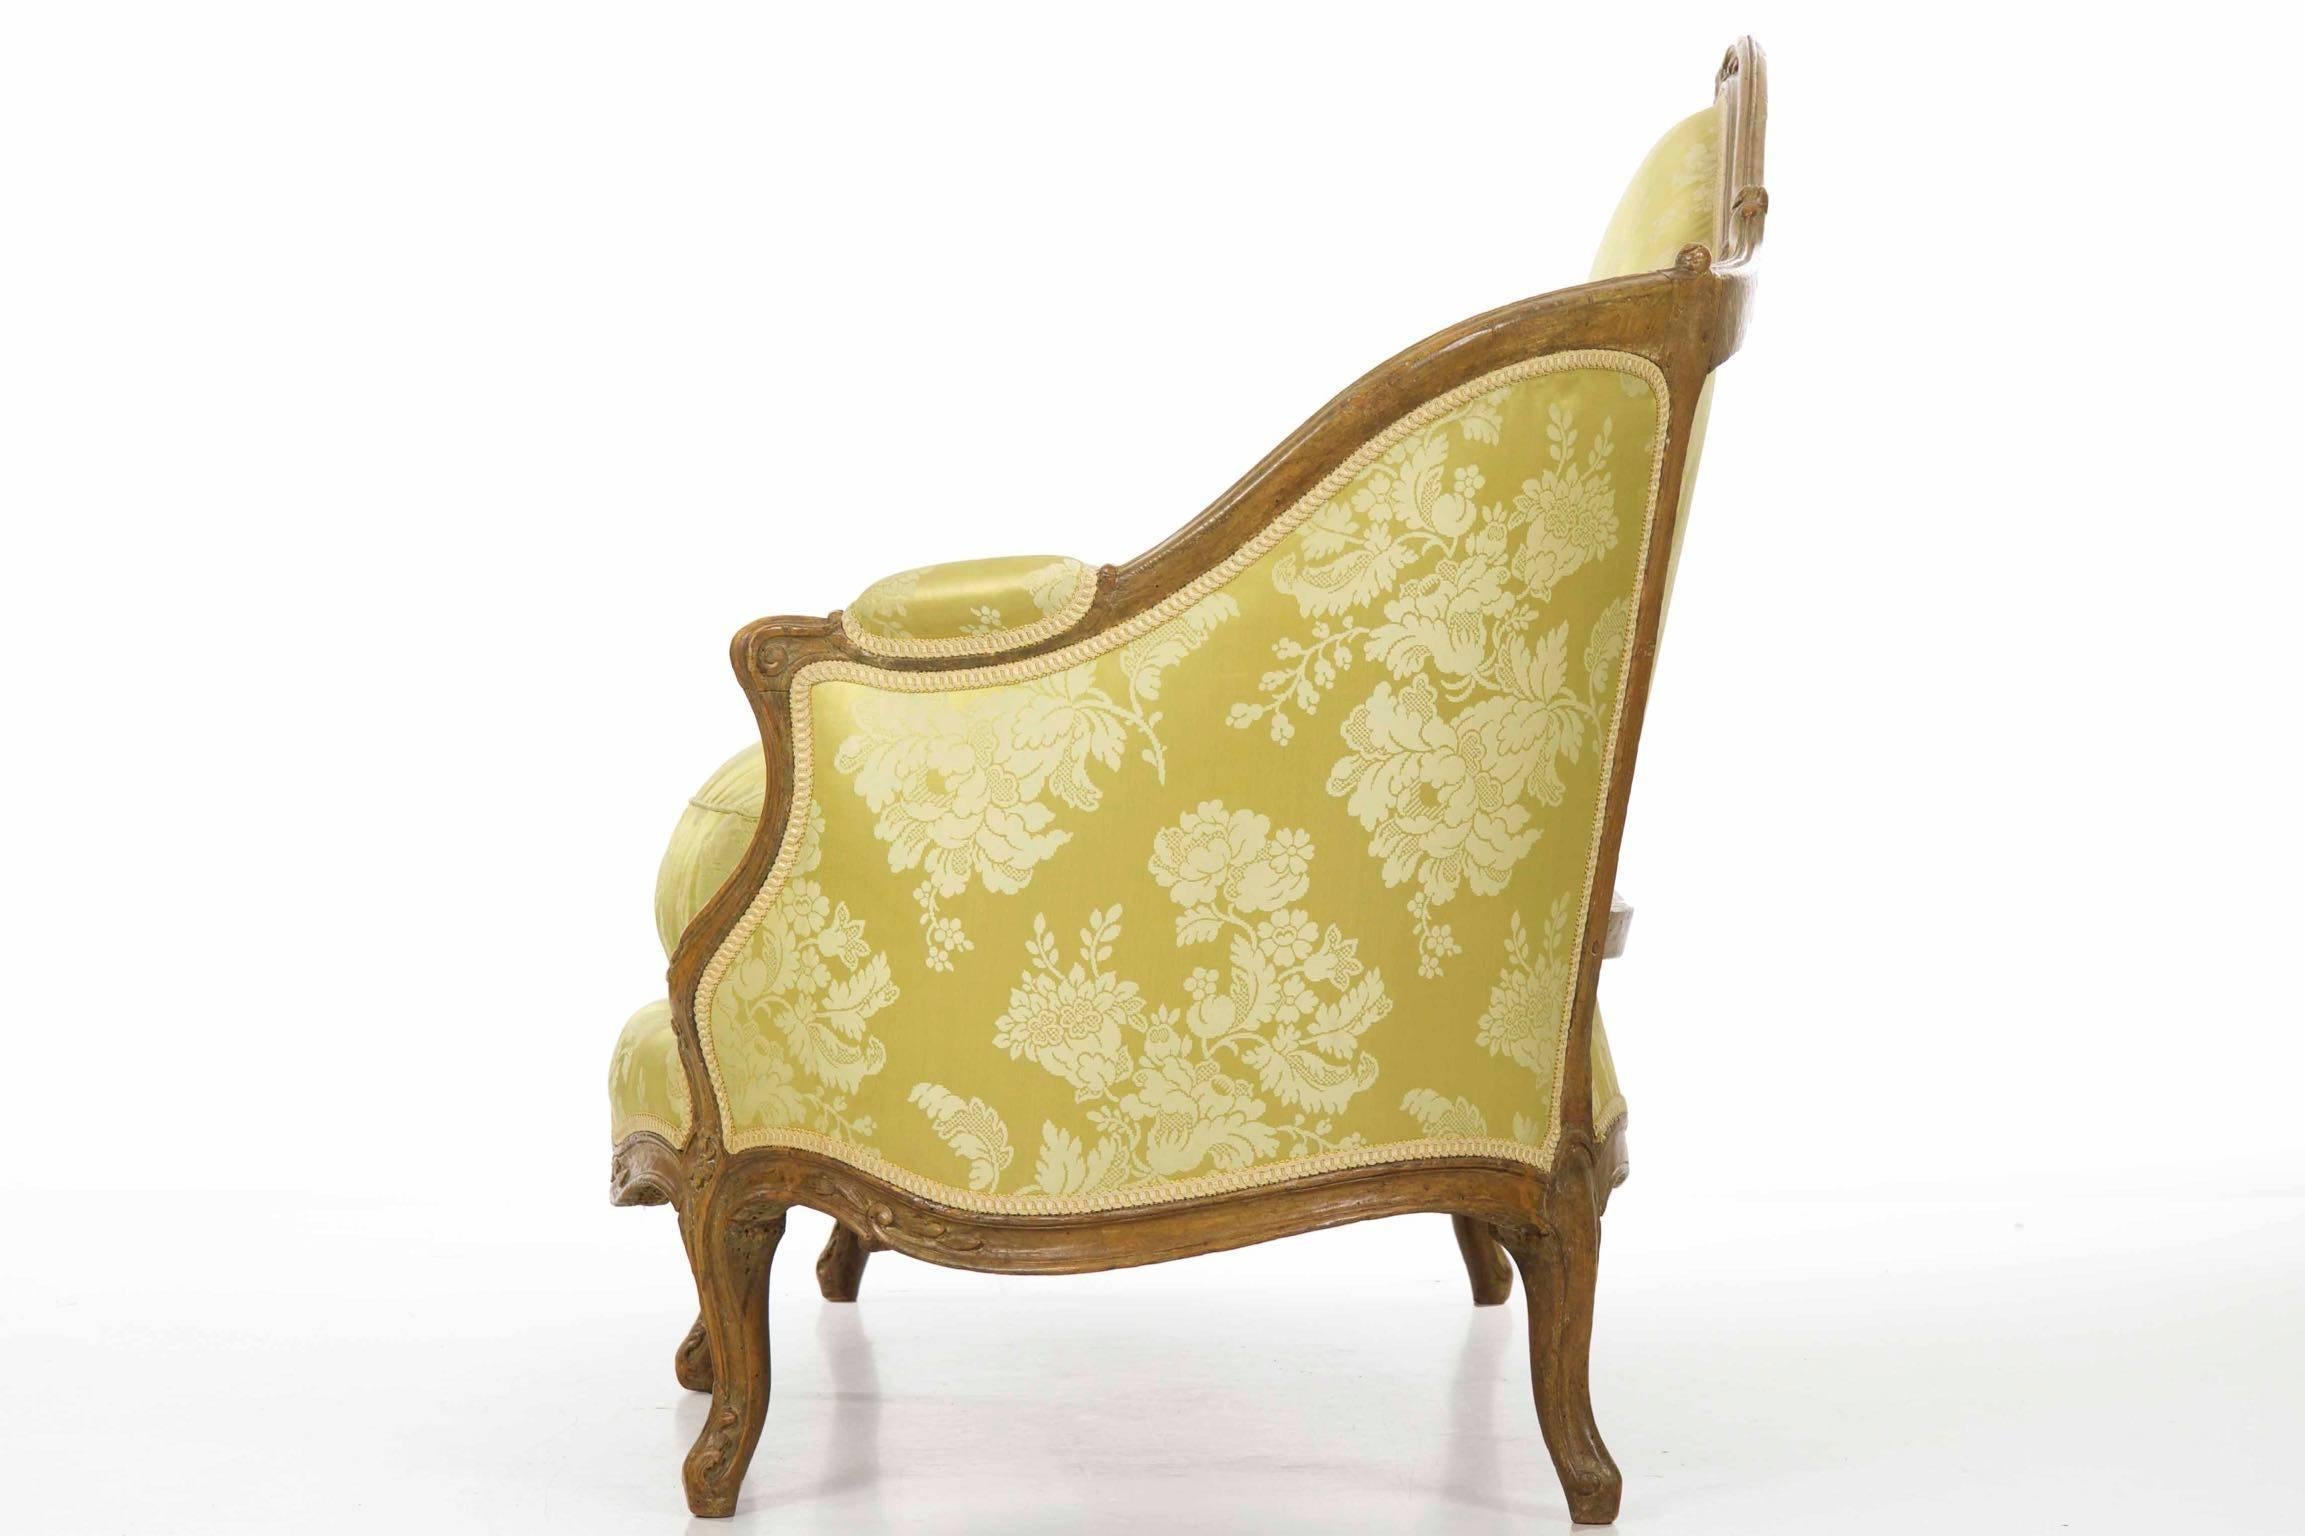 A remarkable piece that has remained in beautiful original condition despite two hundred and fifty years of use, this very fine canapé is of the Louis XV period circa the third quarter of the 18th century. The surface retains a fine early patina